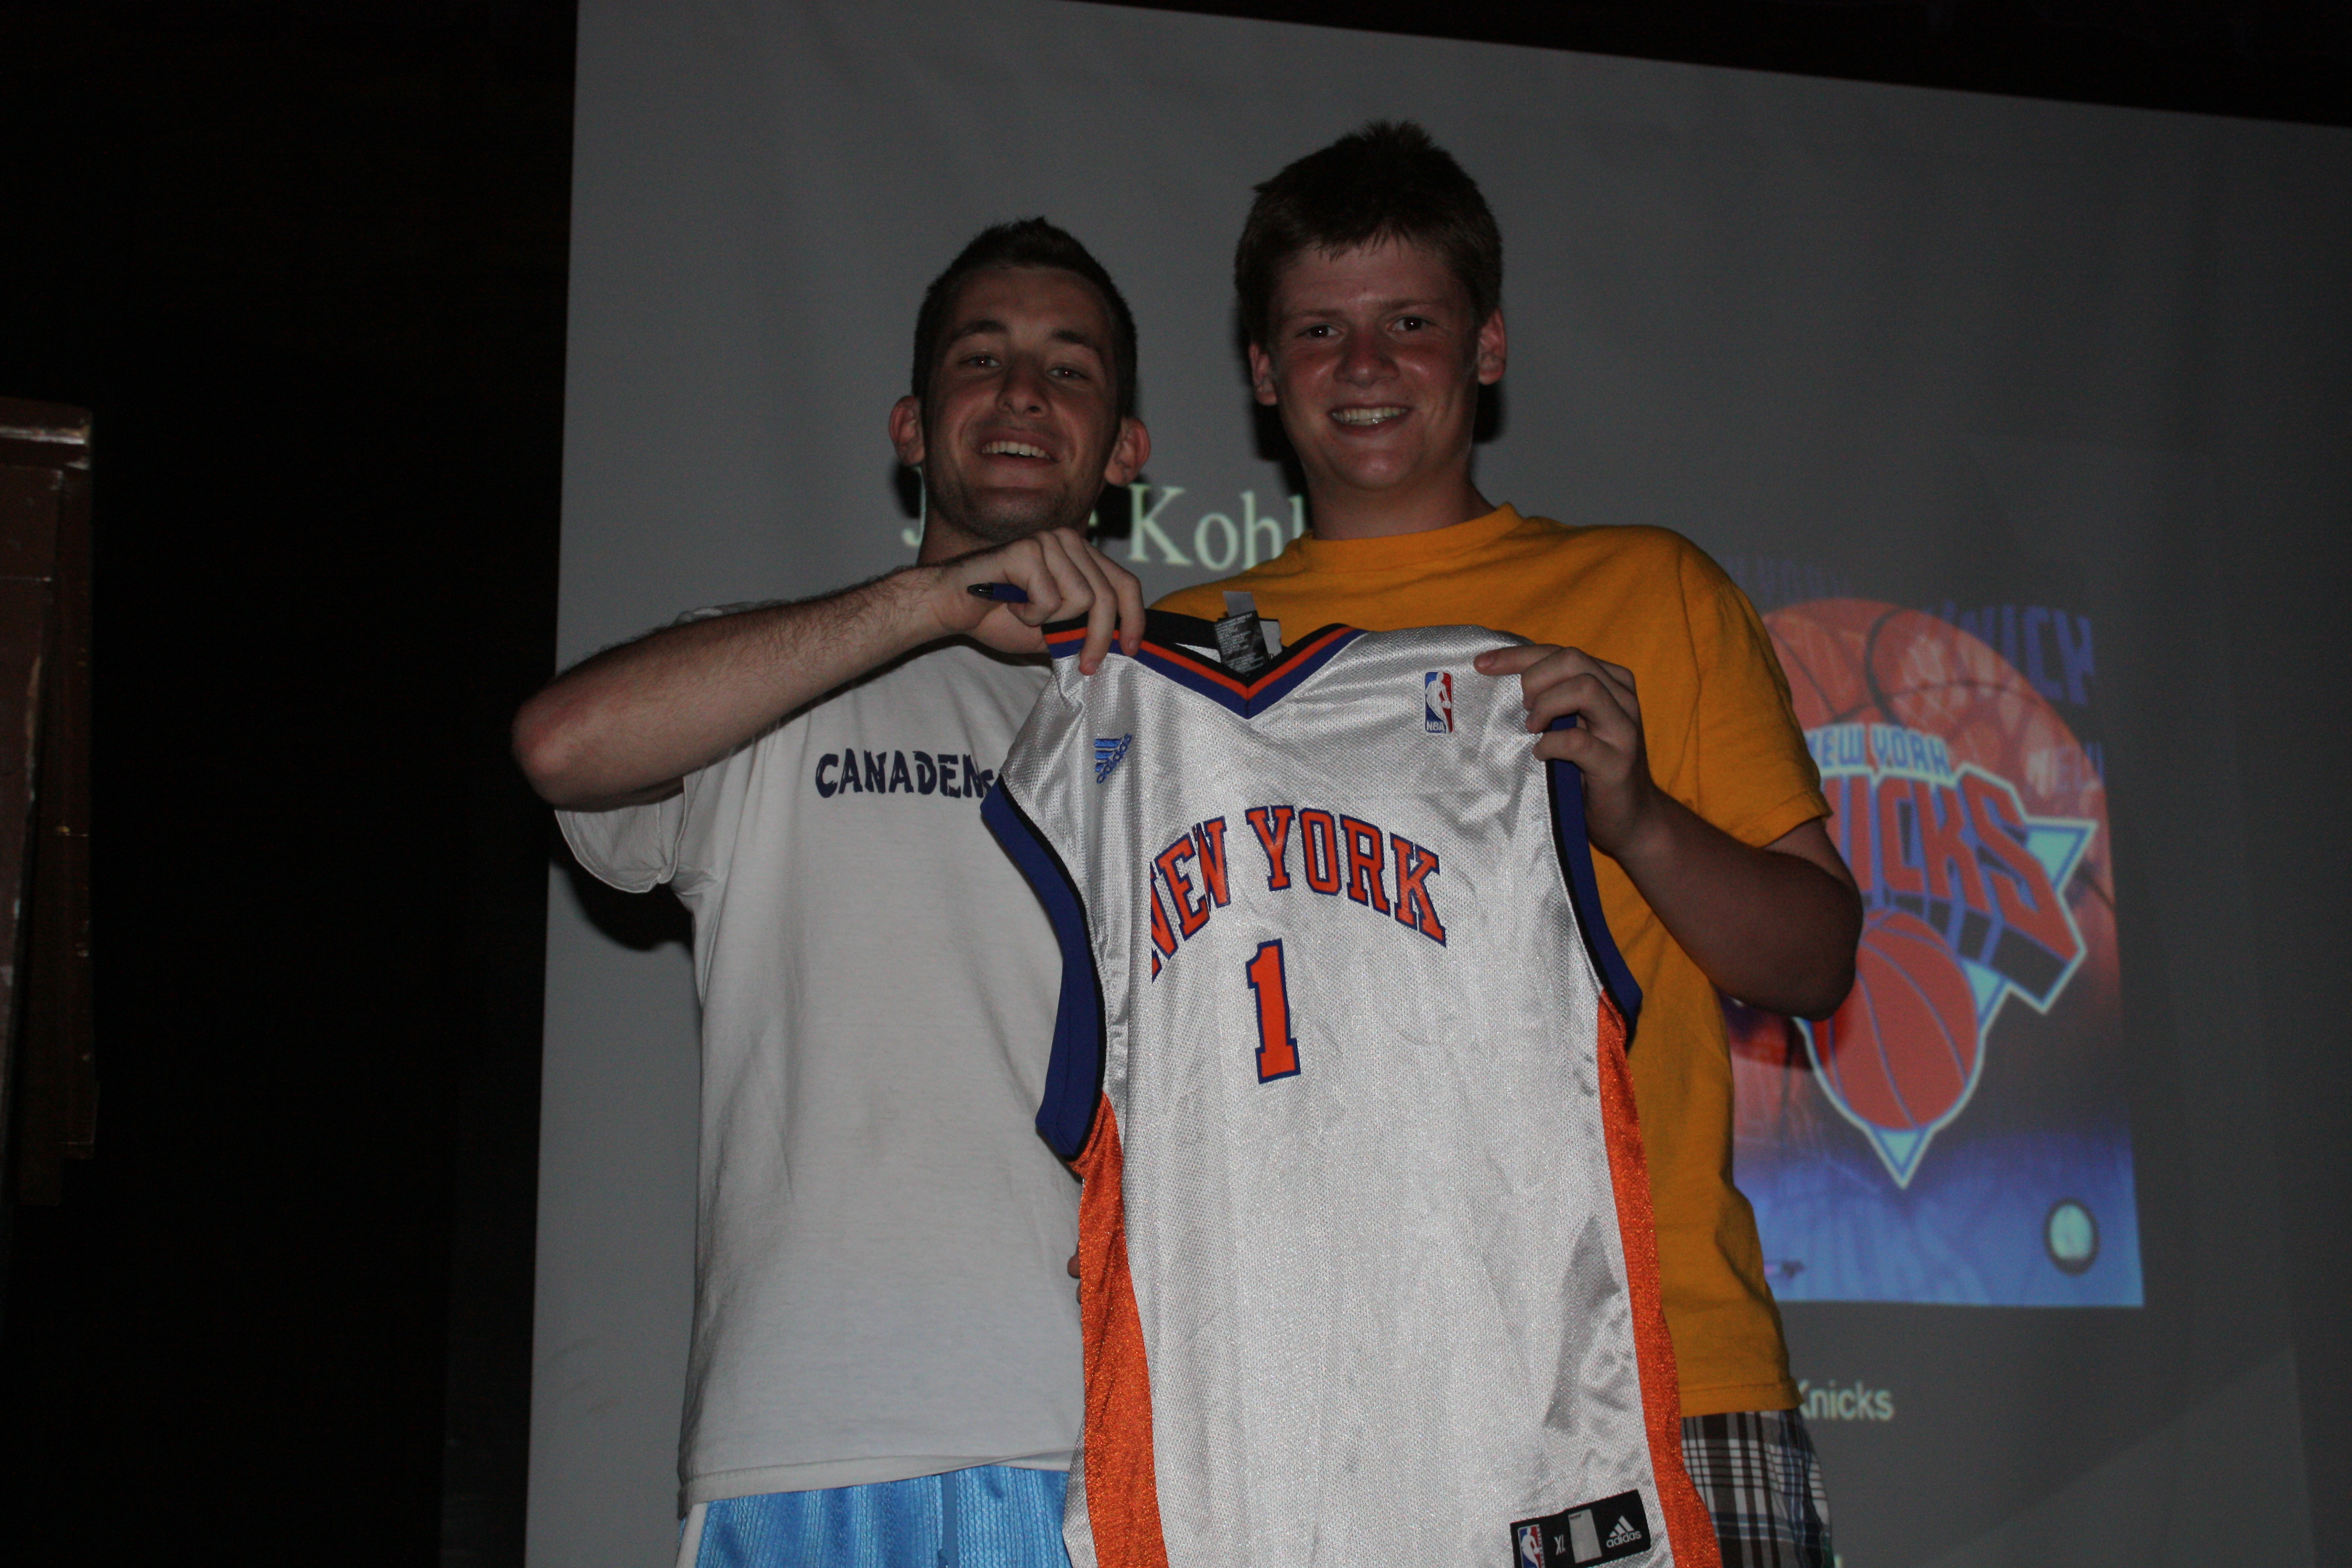 Jesse is the first pick of the Knicks and Coach Greg Richner in the NBA Draft.  